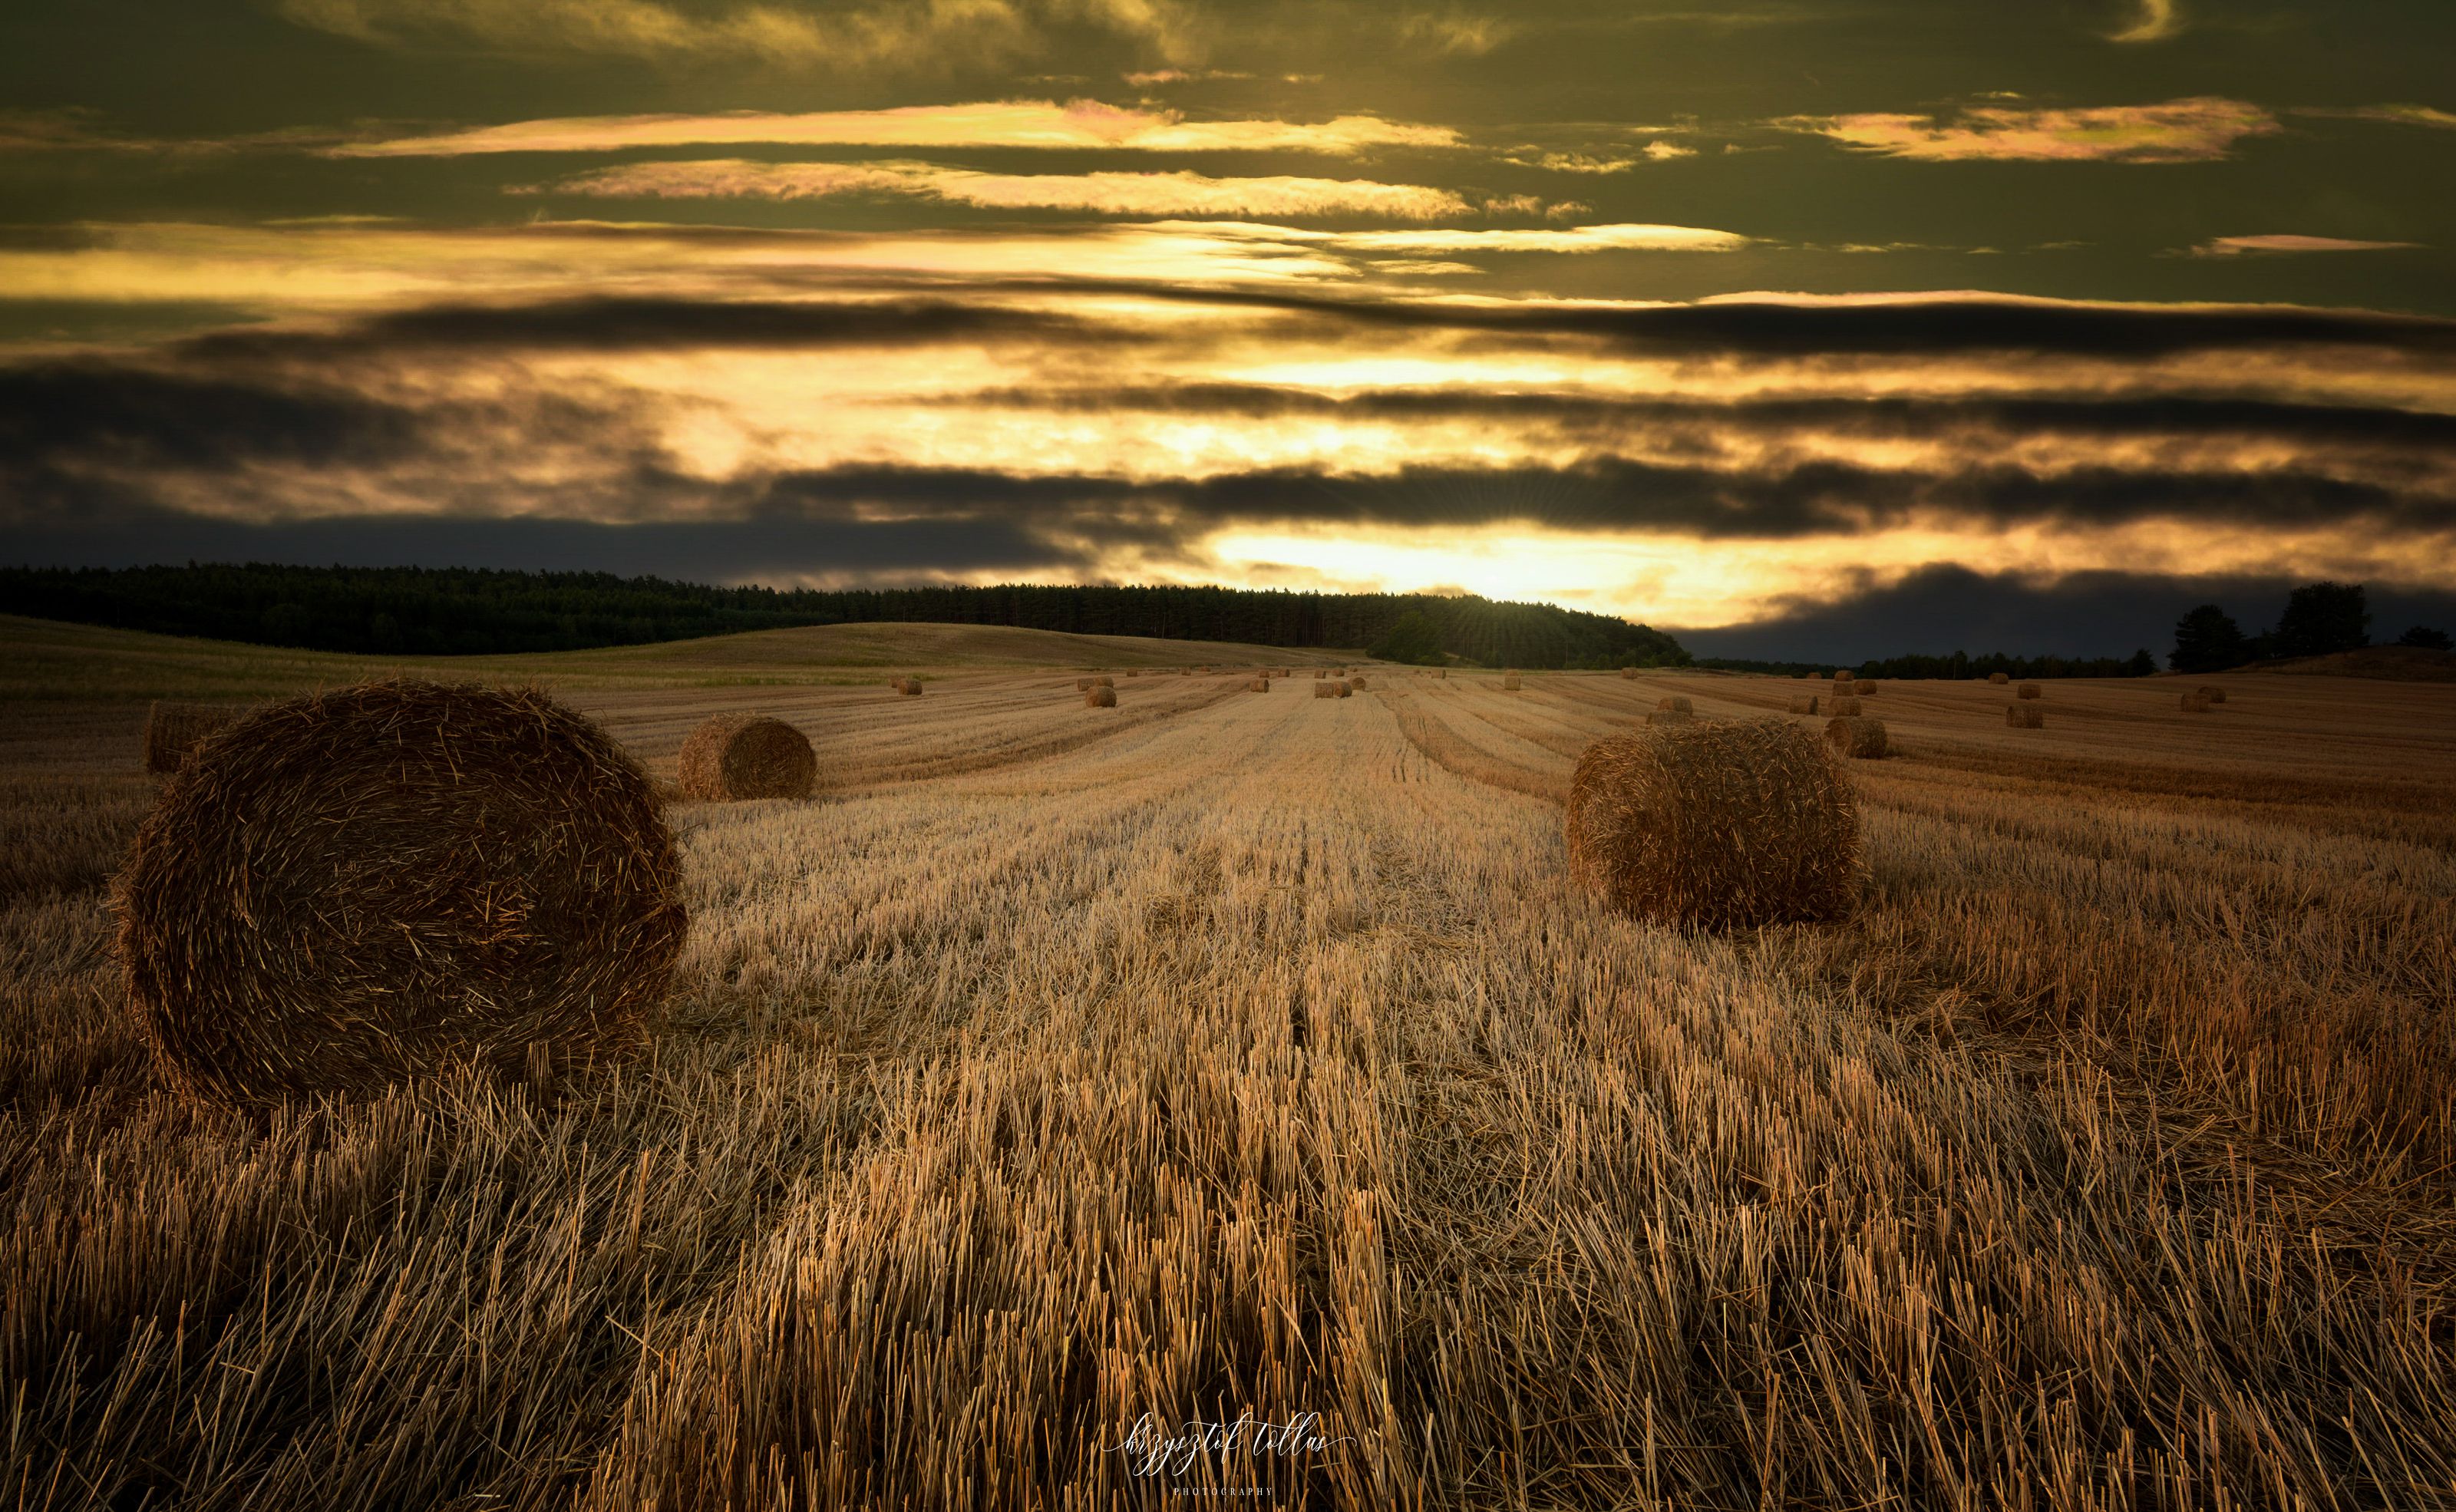 hay bales  landscape  field  agriculture  sky  sunset  clouds  light  Nikon D750  forest  No People  Landscape - Scenery  Nature  Agriculture, Krzysztof Tollas